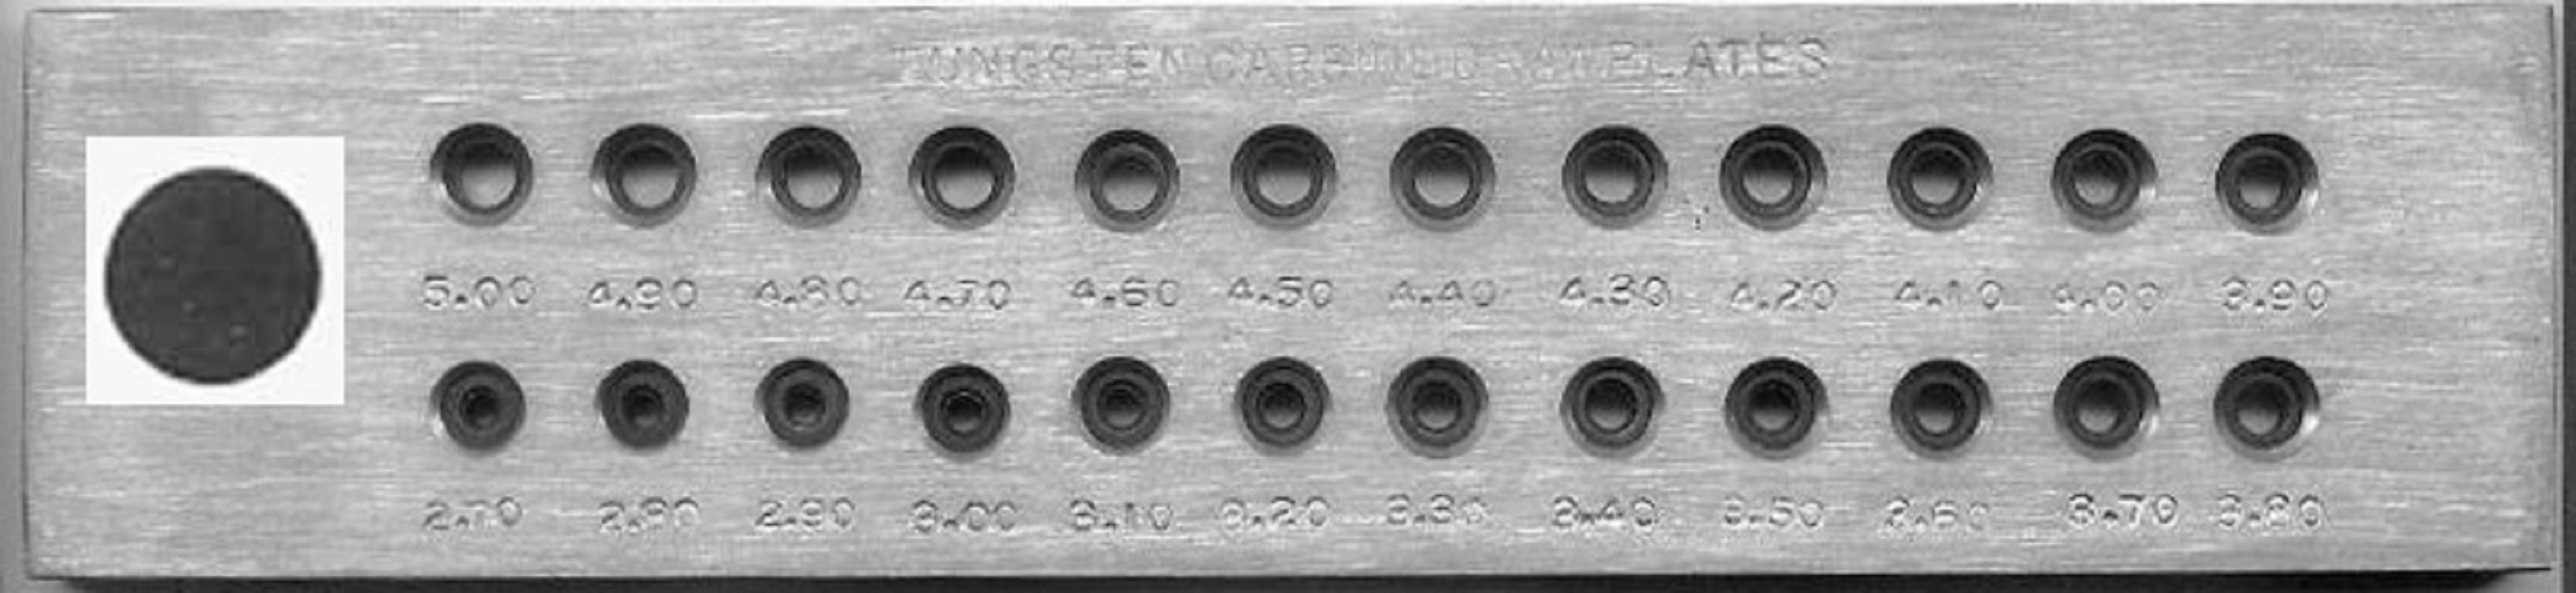 TUNGSTEN CARBIDE DRAWPLATE 24 ROUND HOLES 2.7-5.0mm - Click Image to Close